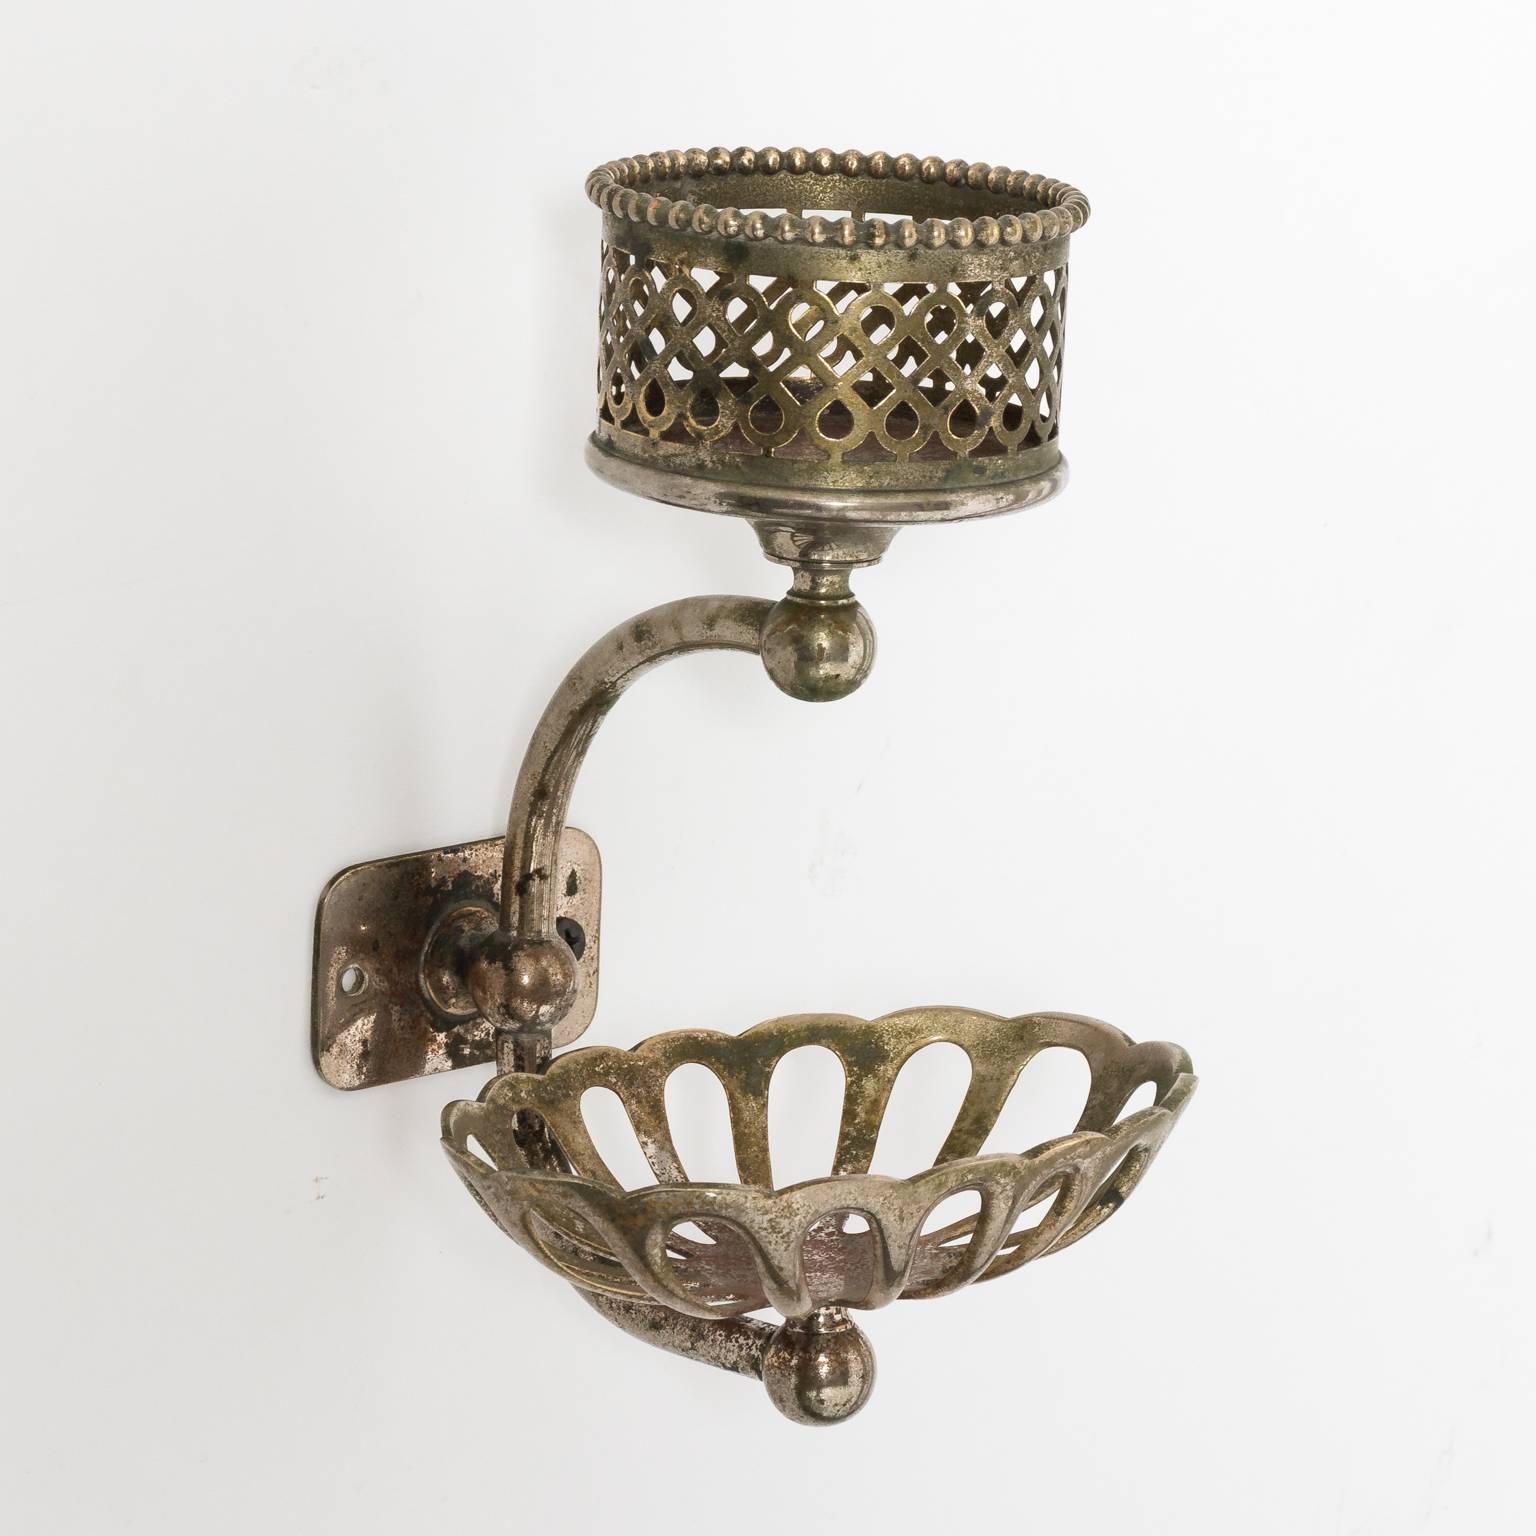 20th Century Antique Finish Nickel Cup and Soap Holder, circa 1900